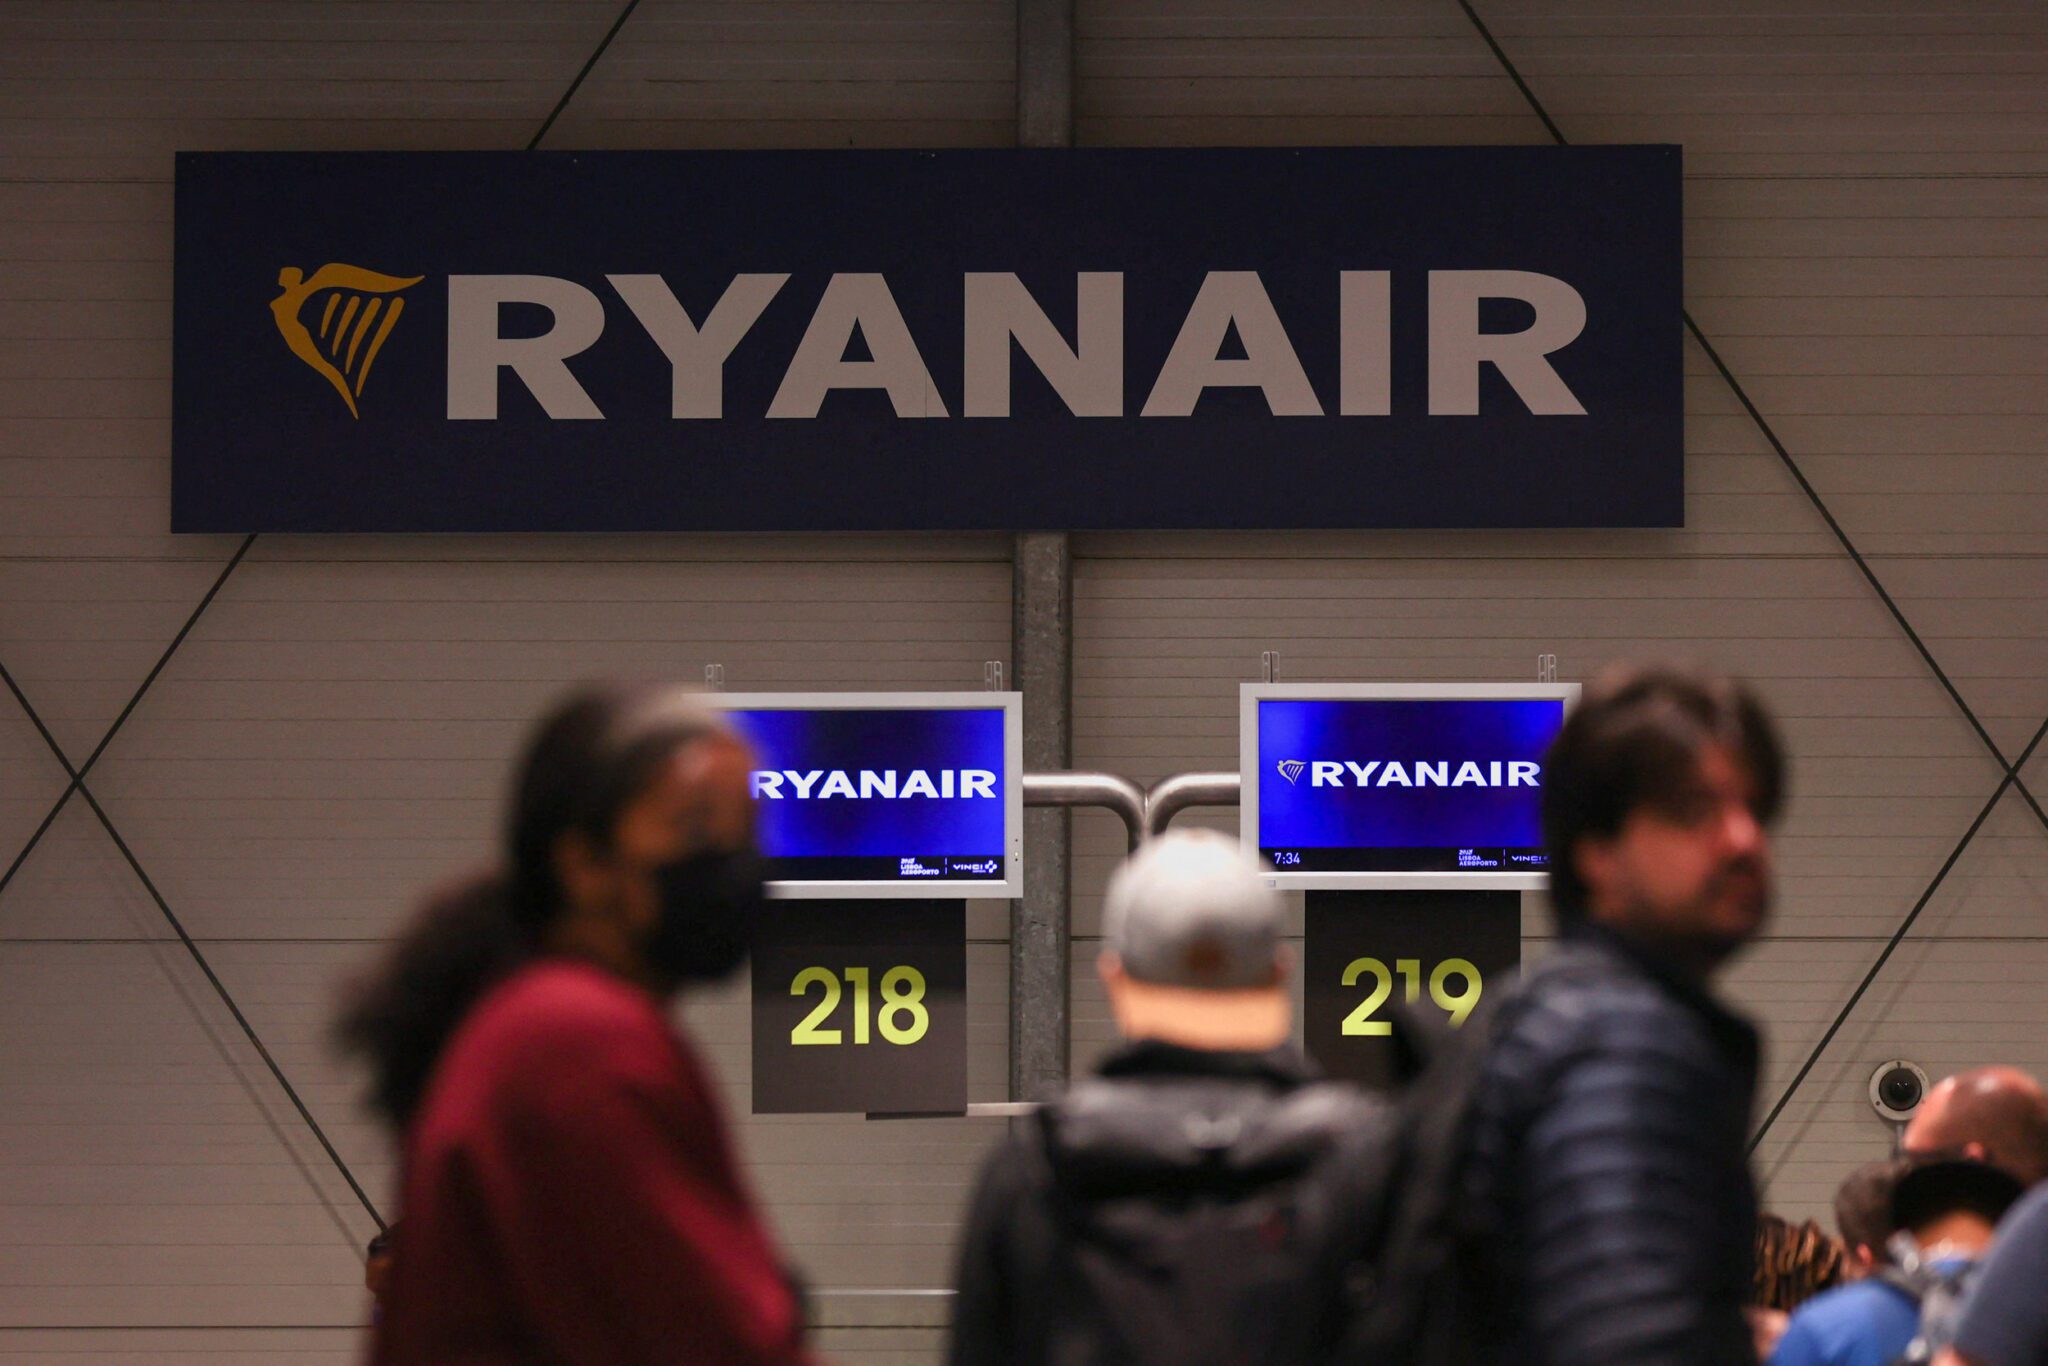 Ryanair recently rented student accommodation for some staff that transferred to Dublin airport.